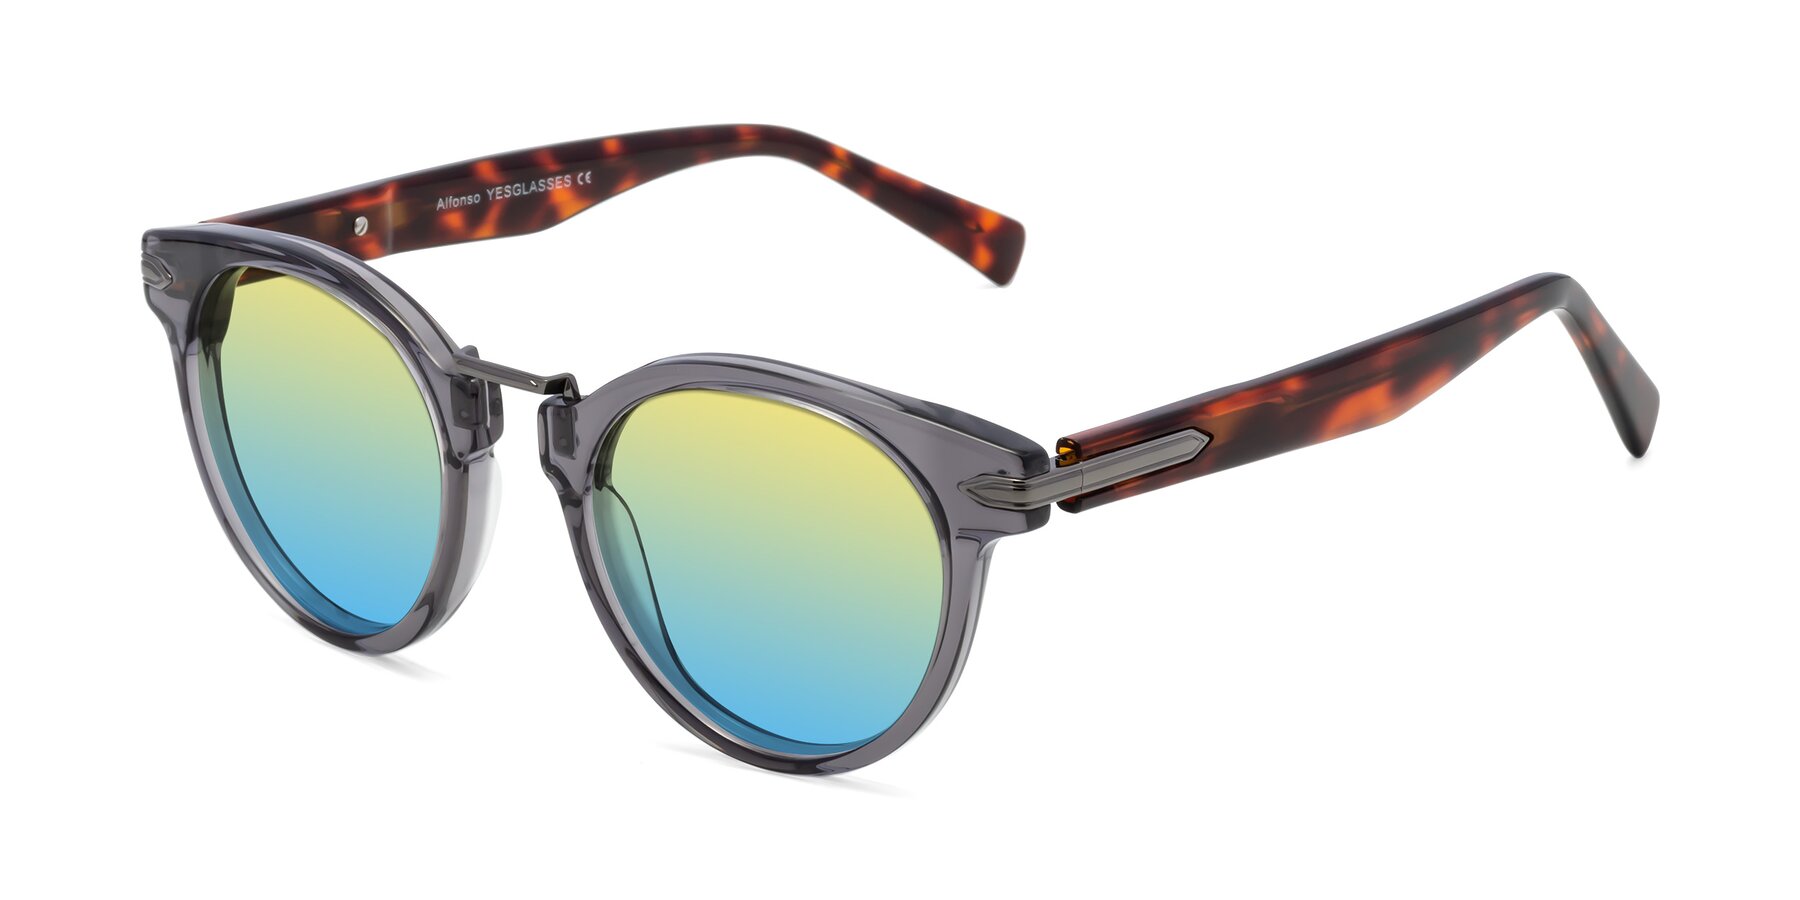 Angle of Alfonso in Gray /Tortoise with Yellow / Blue Gradient Lenses